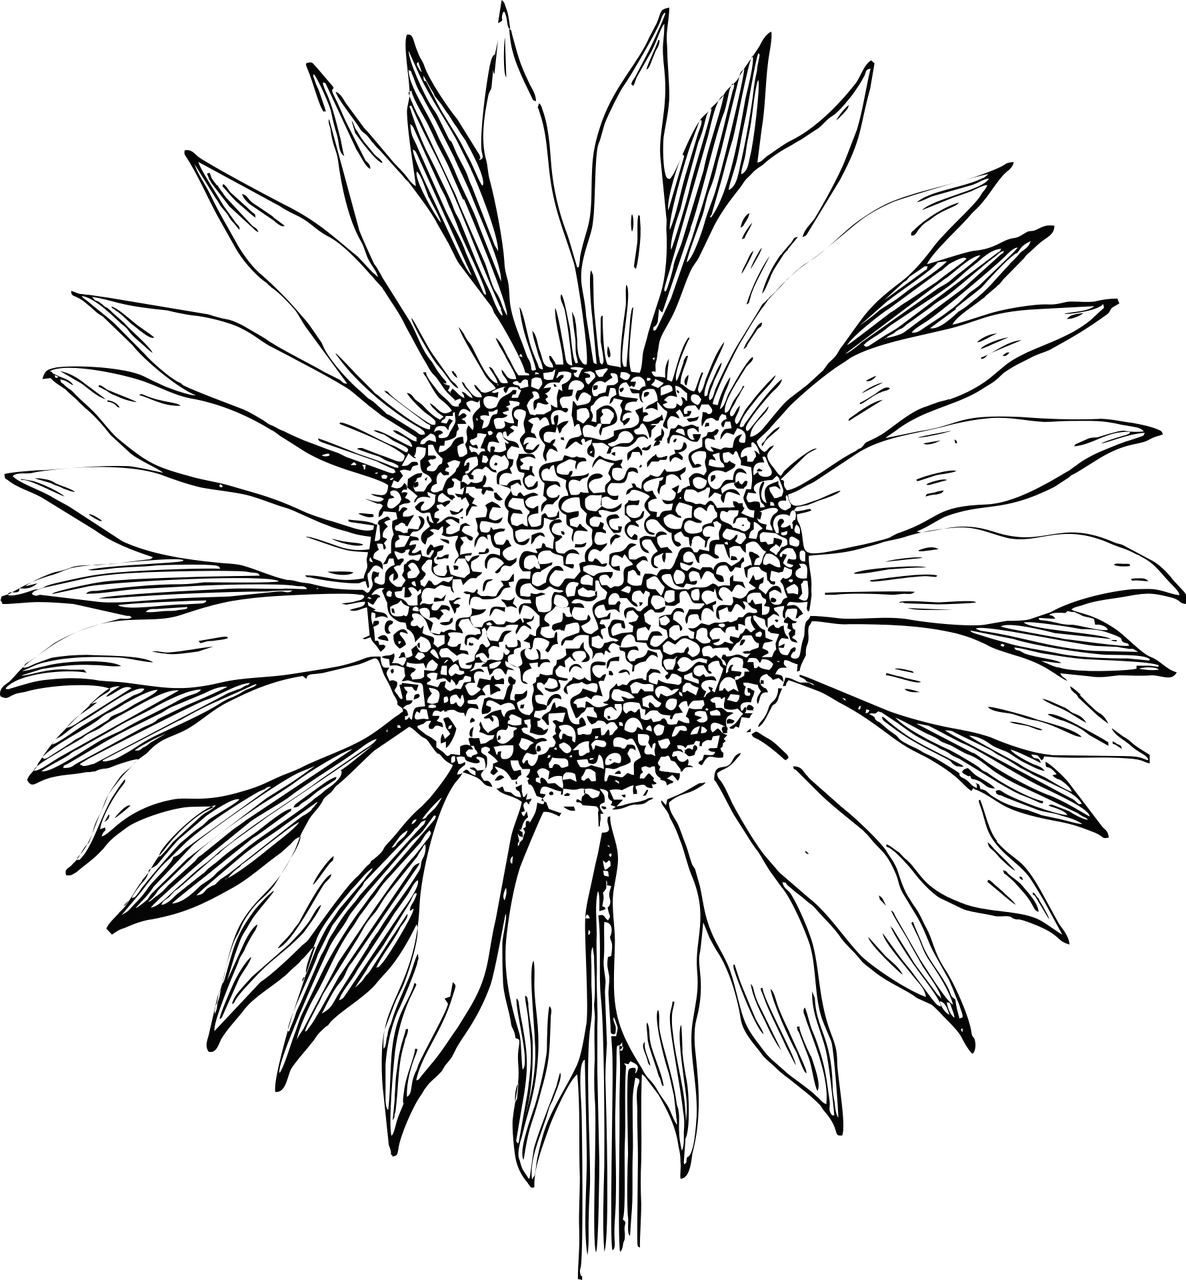 A Black And White Image Of A Sunflower